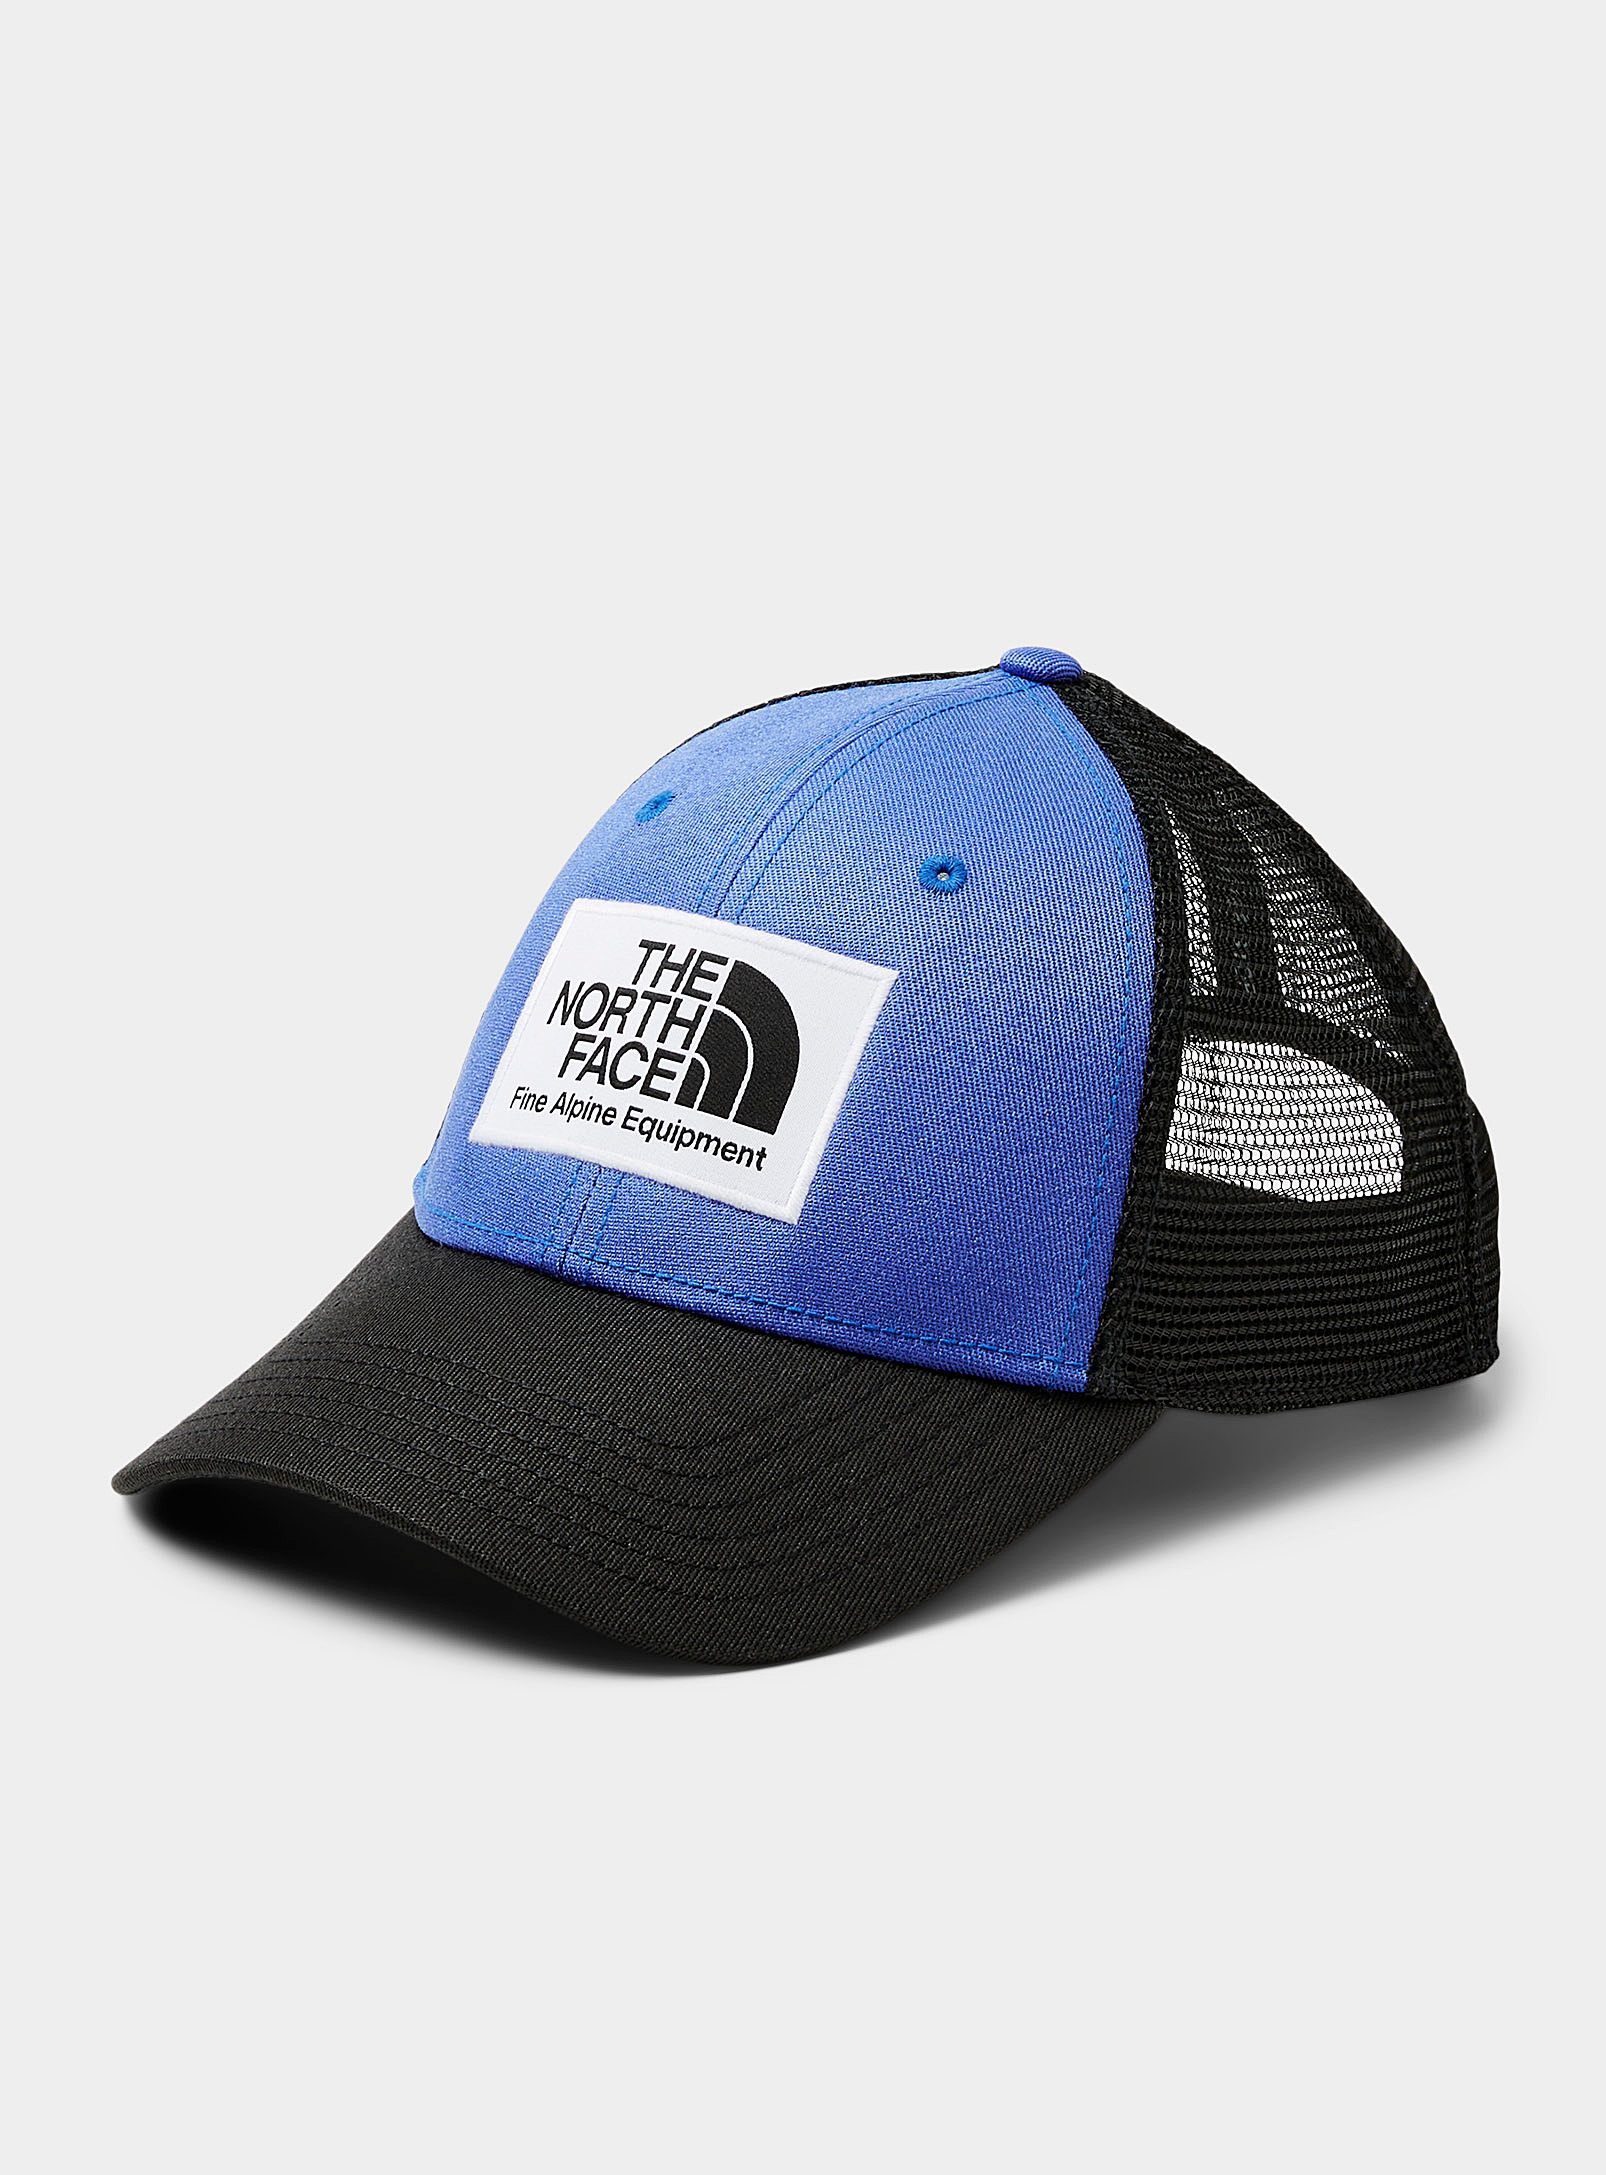 The North Face Mudder Trucker Cap In Patterned Blue